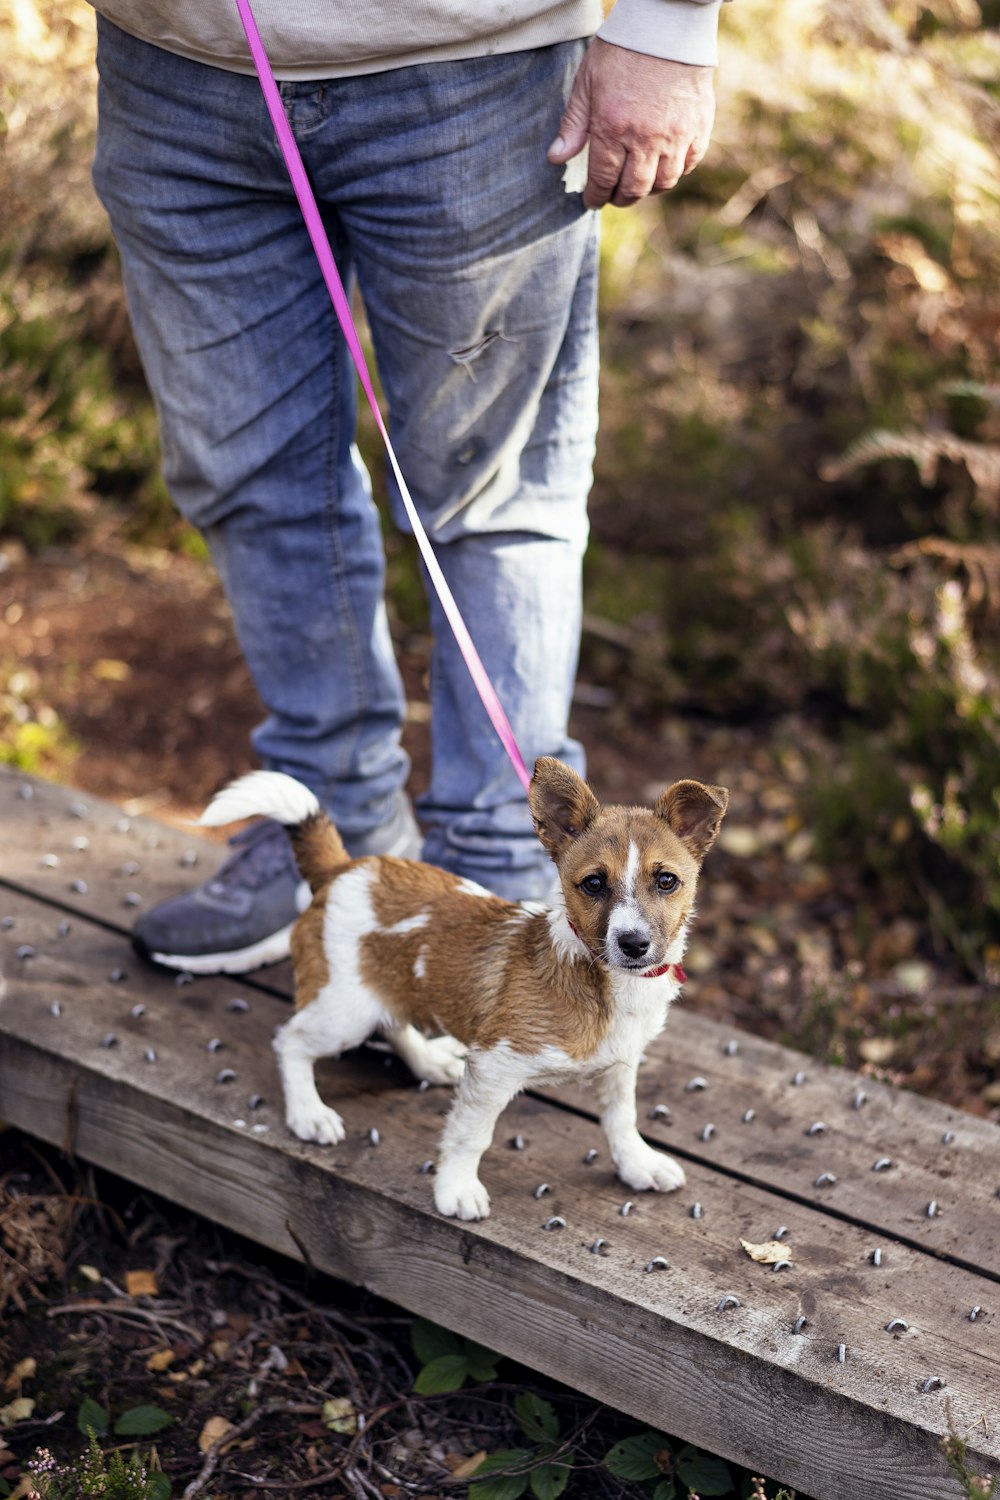 a small brown and white dog standing on a wooden platform